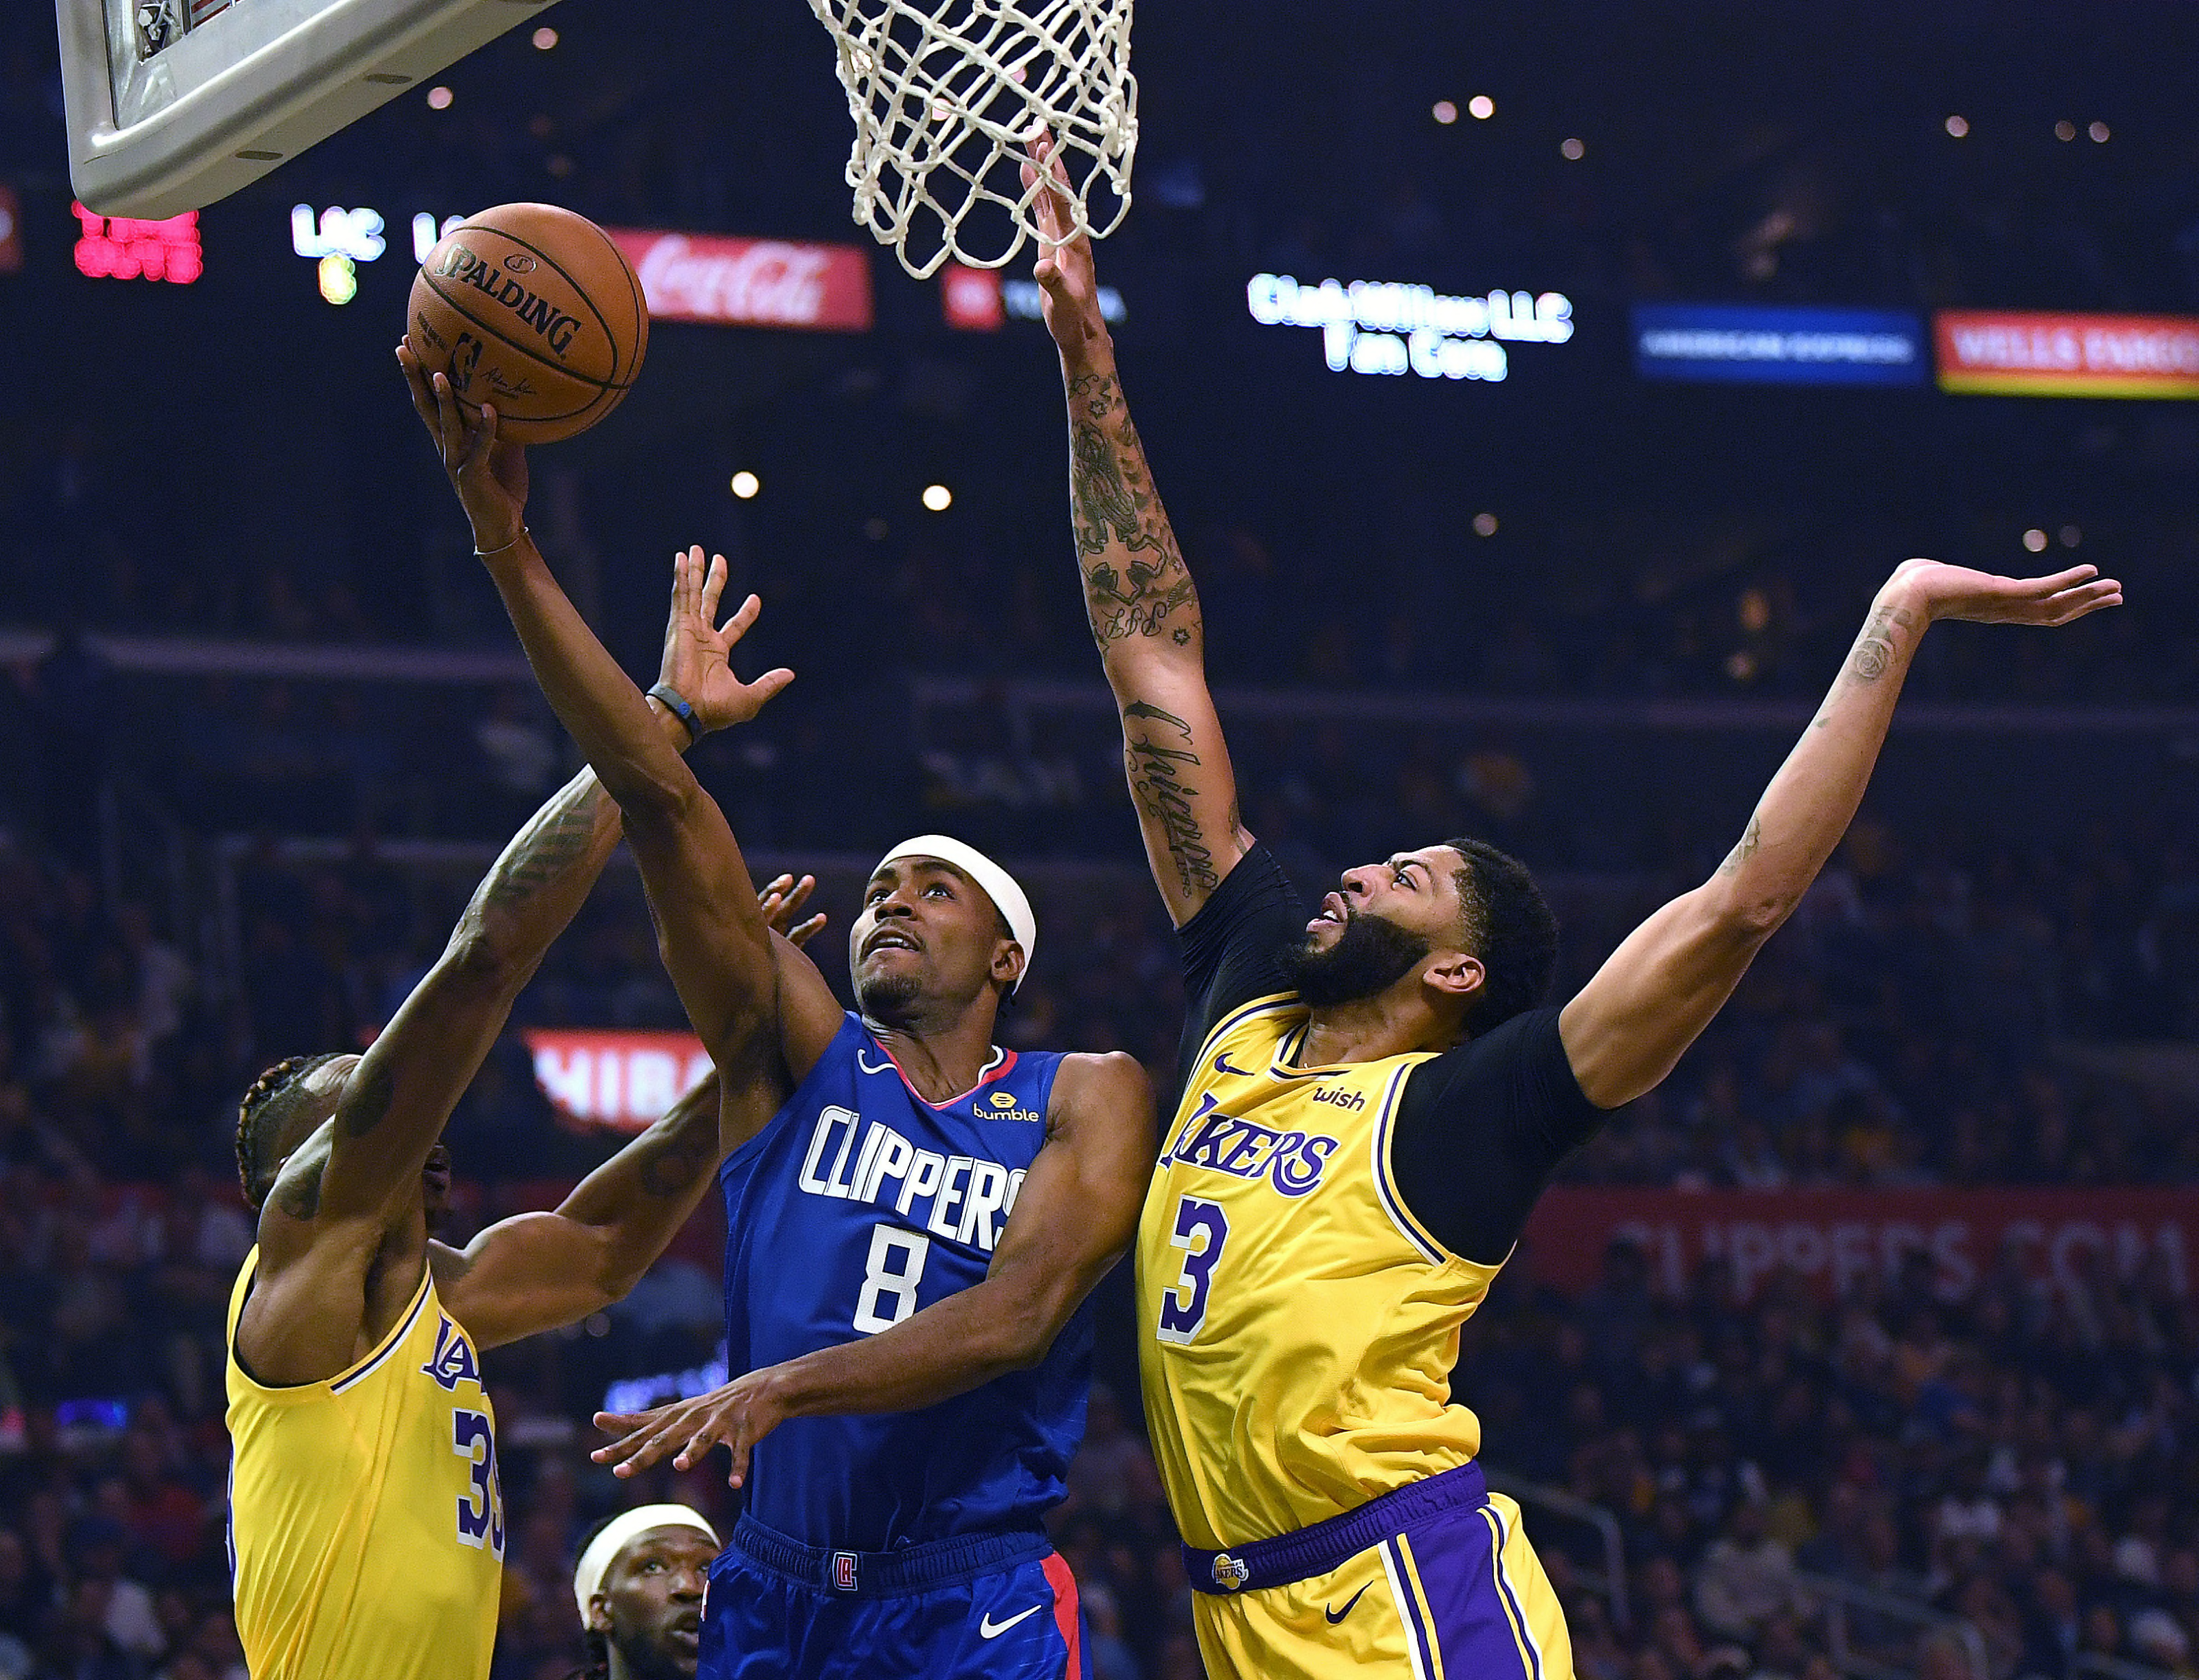 Clippers vs Lakers: Who has the better starting 5?